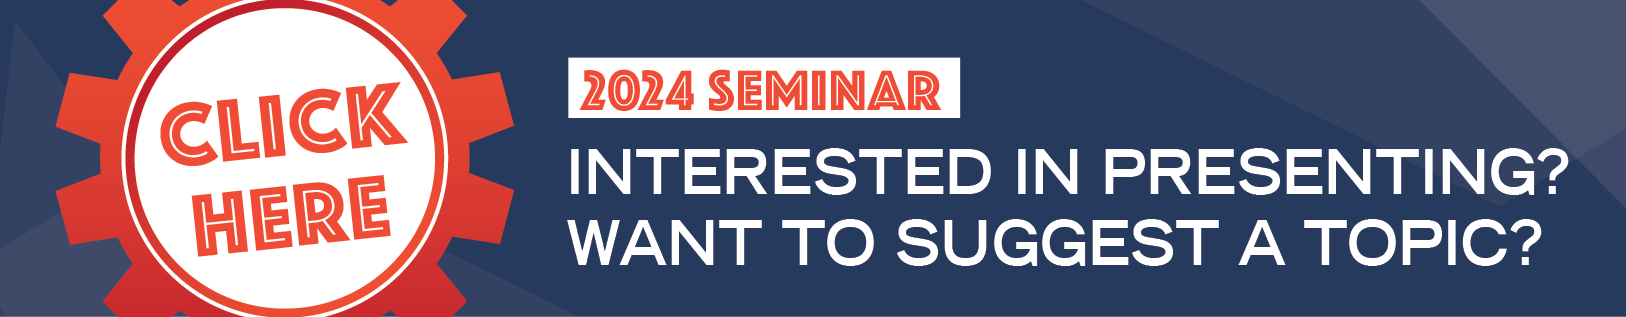 2024 Seminar - Interested in presenting? Want to suggest a topic? Click here.